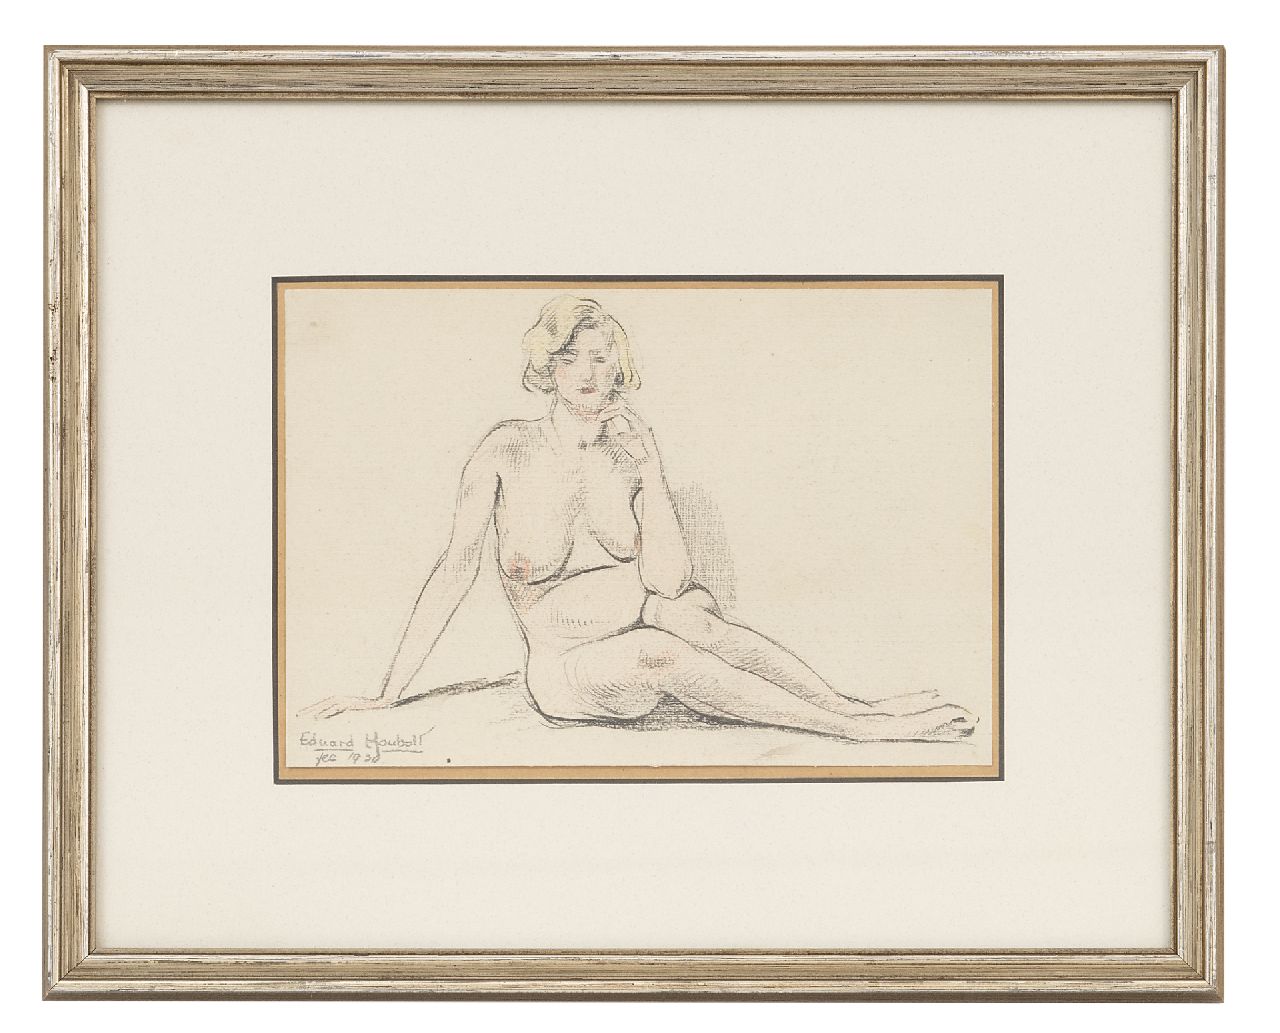 Houbolt E.  | 'Eduard' Johannes Fredericus Houbolt | Watercolours and drawings offered for sale | Setaed nude, pencil and chalk on paper 11.5 x 16.8 cm, signed l.l. and dated '30